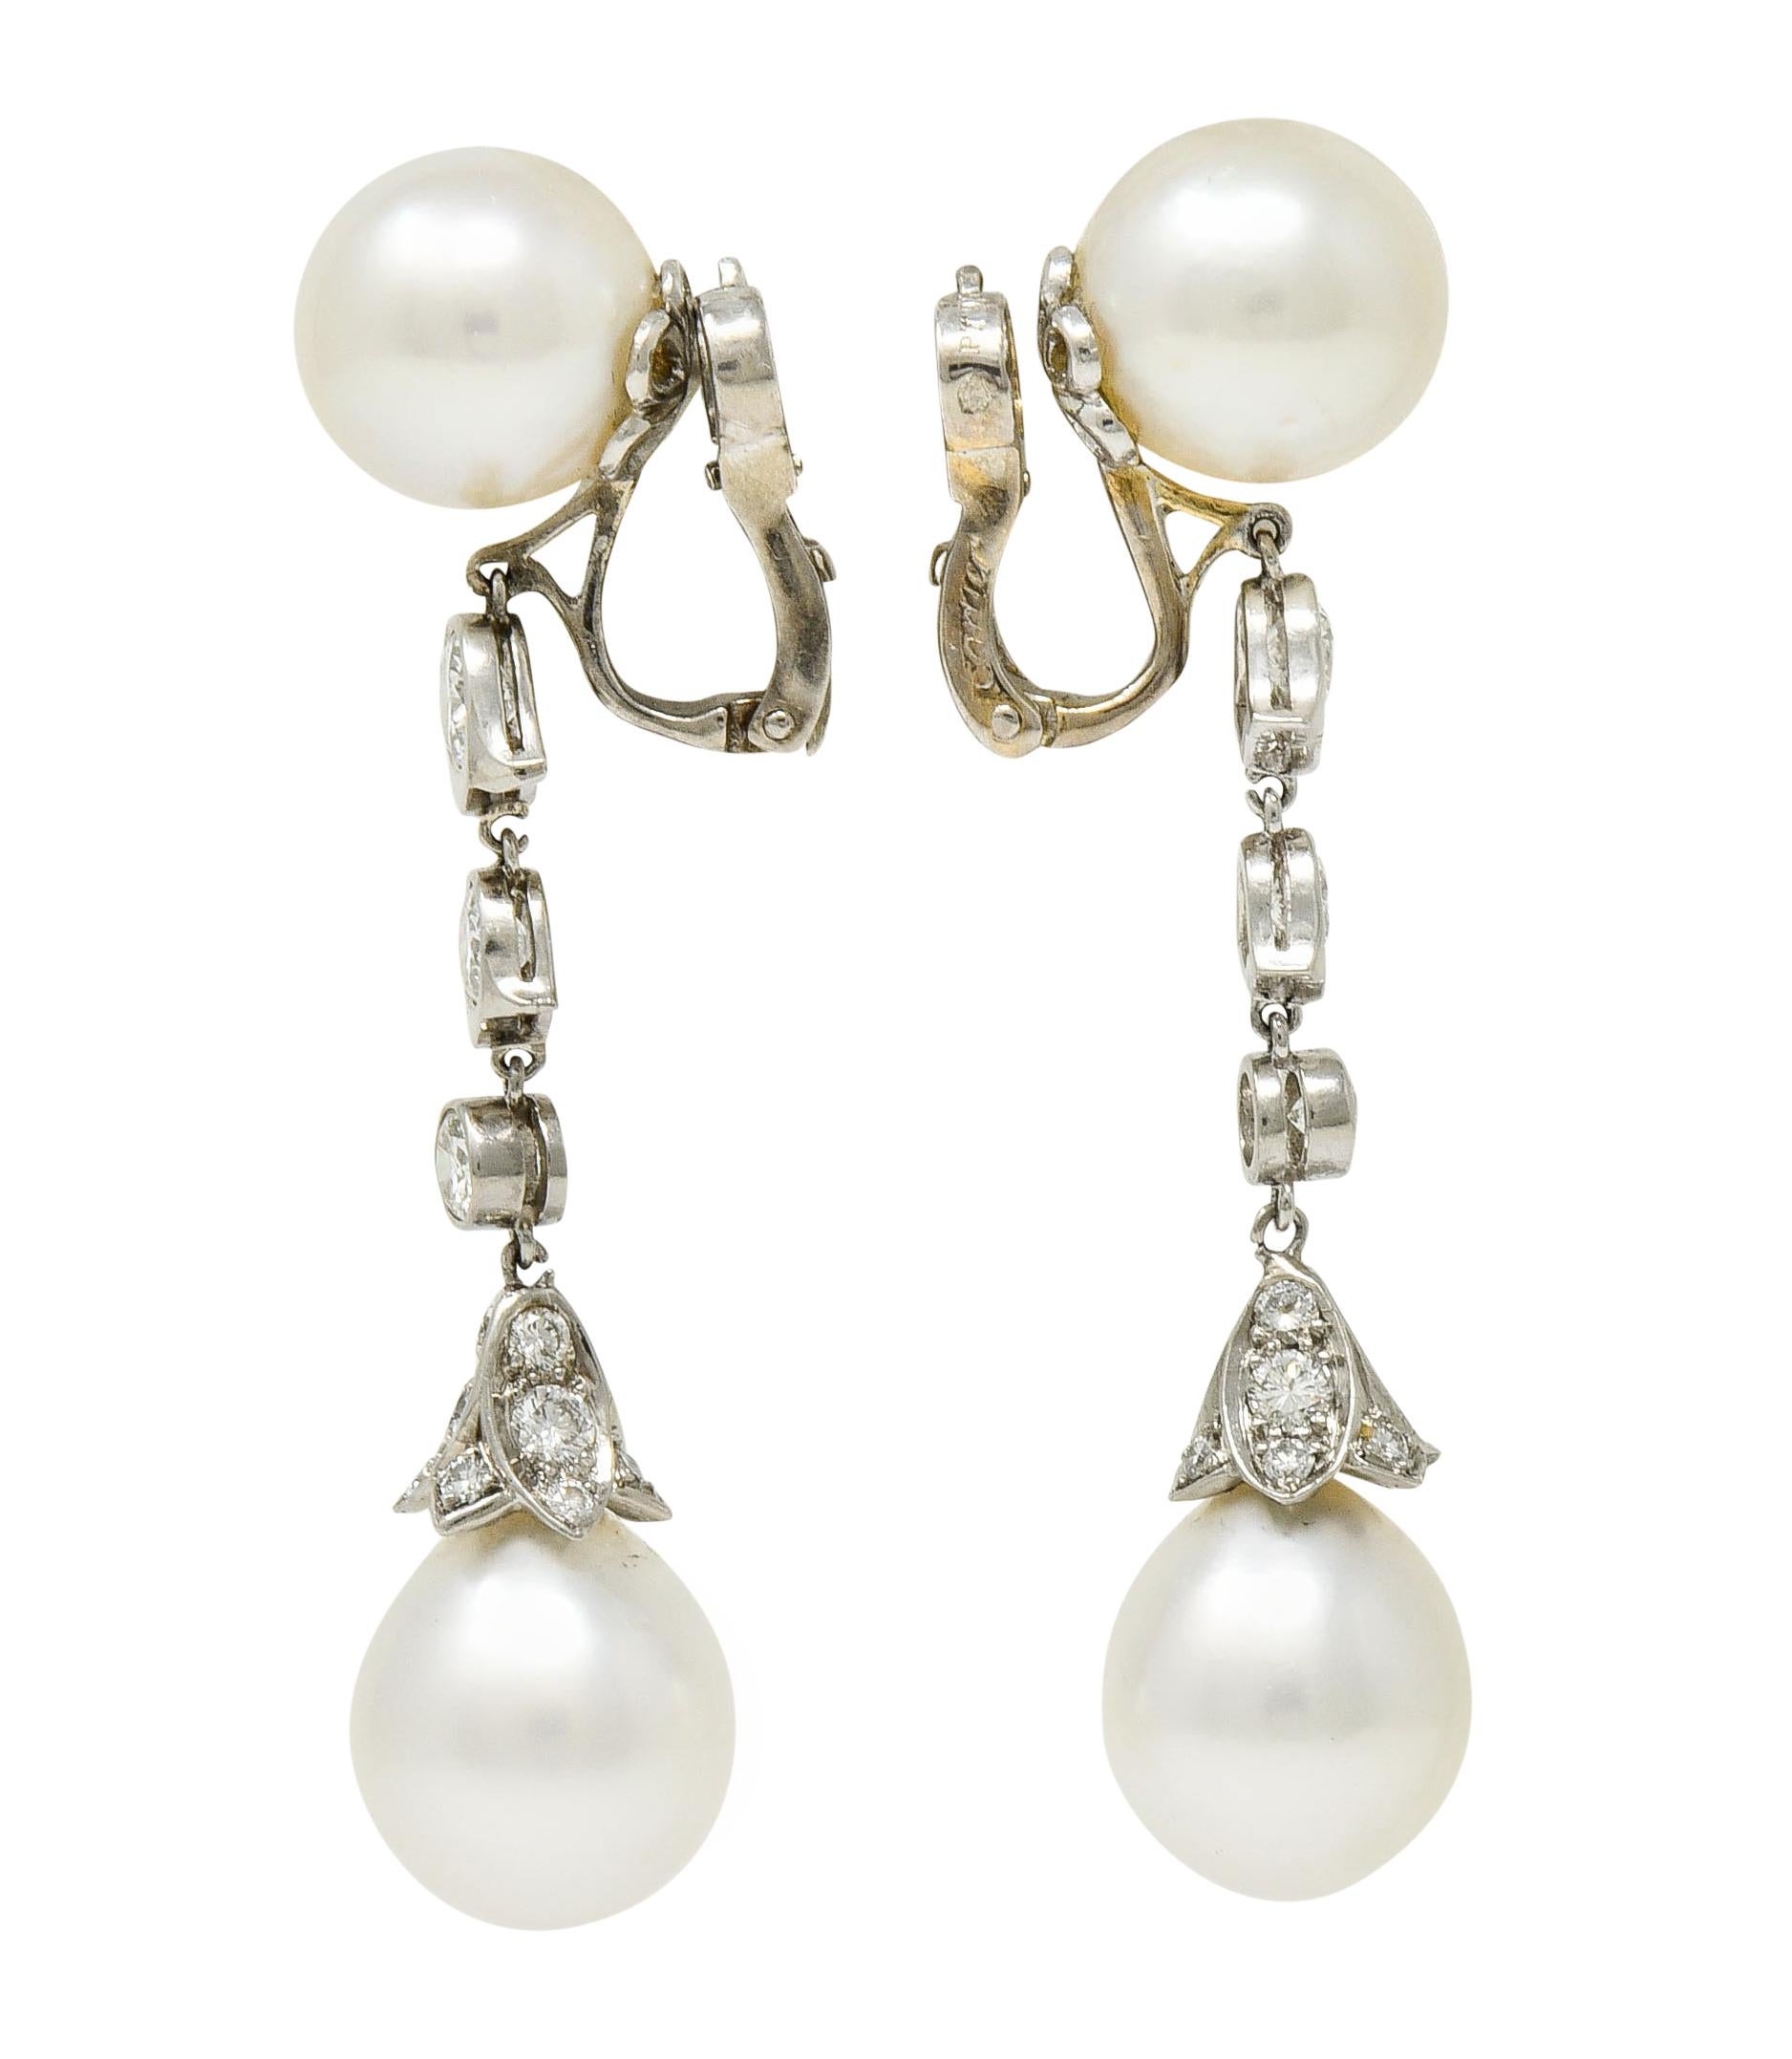 Drop earrings feature a 10.6 mm round South Sea pearl surmount, cream in body color with rosè overtones and excellent luster

Suspending stylized floral bezel links, articulated, and a pavè scalloped pearl cap; tested as platinum

Set with round